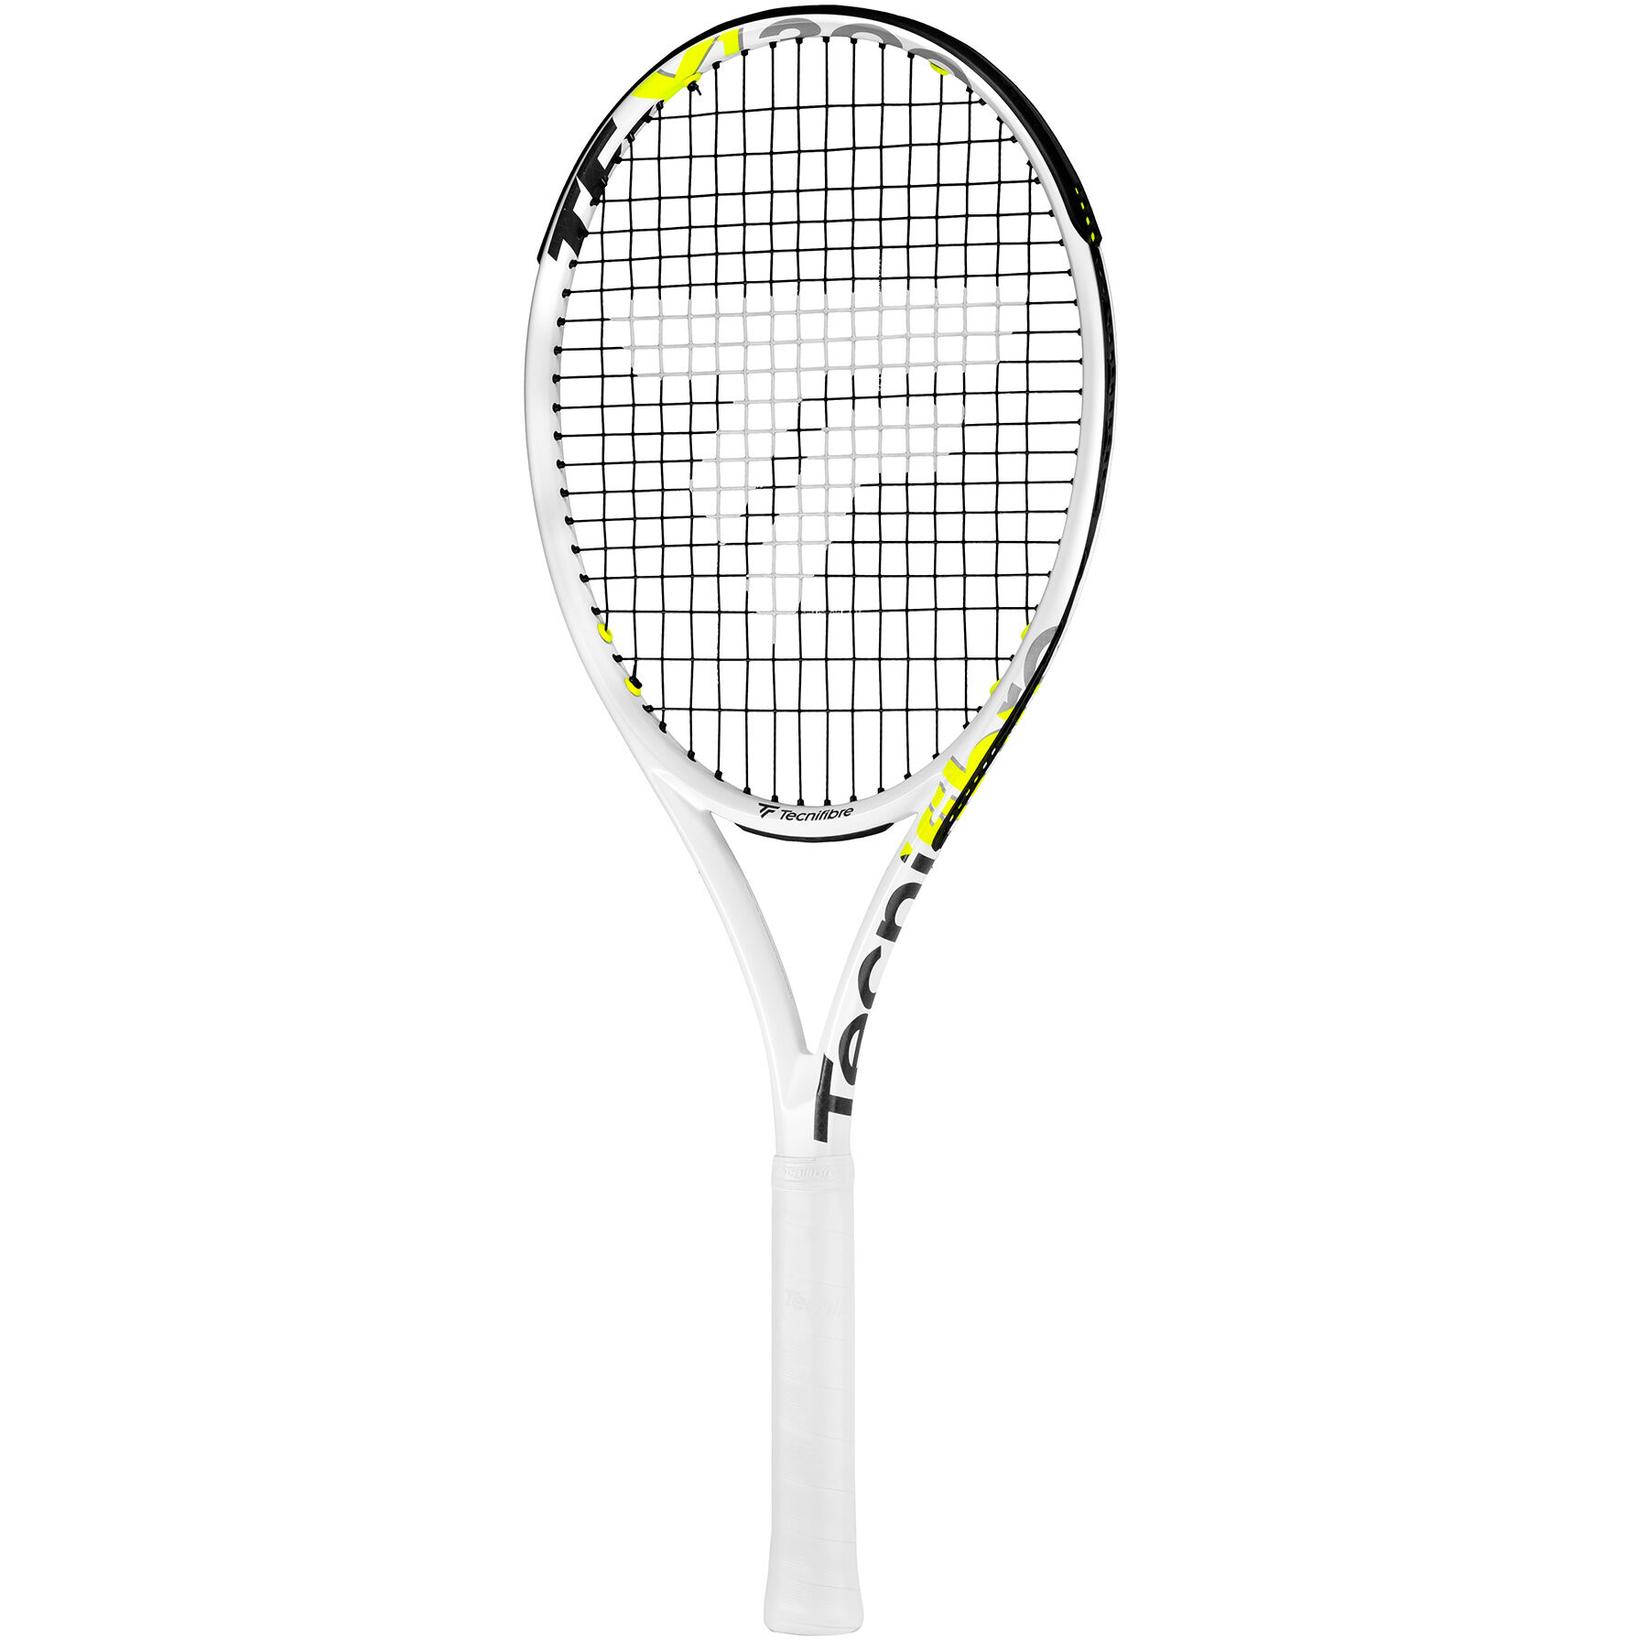 Selected image for TECNIFIBRE Reket TF-X1 300 G2